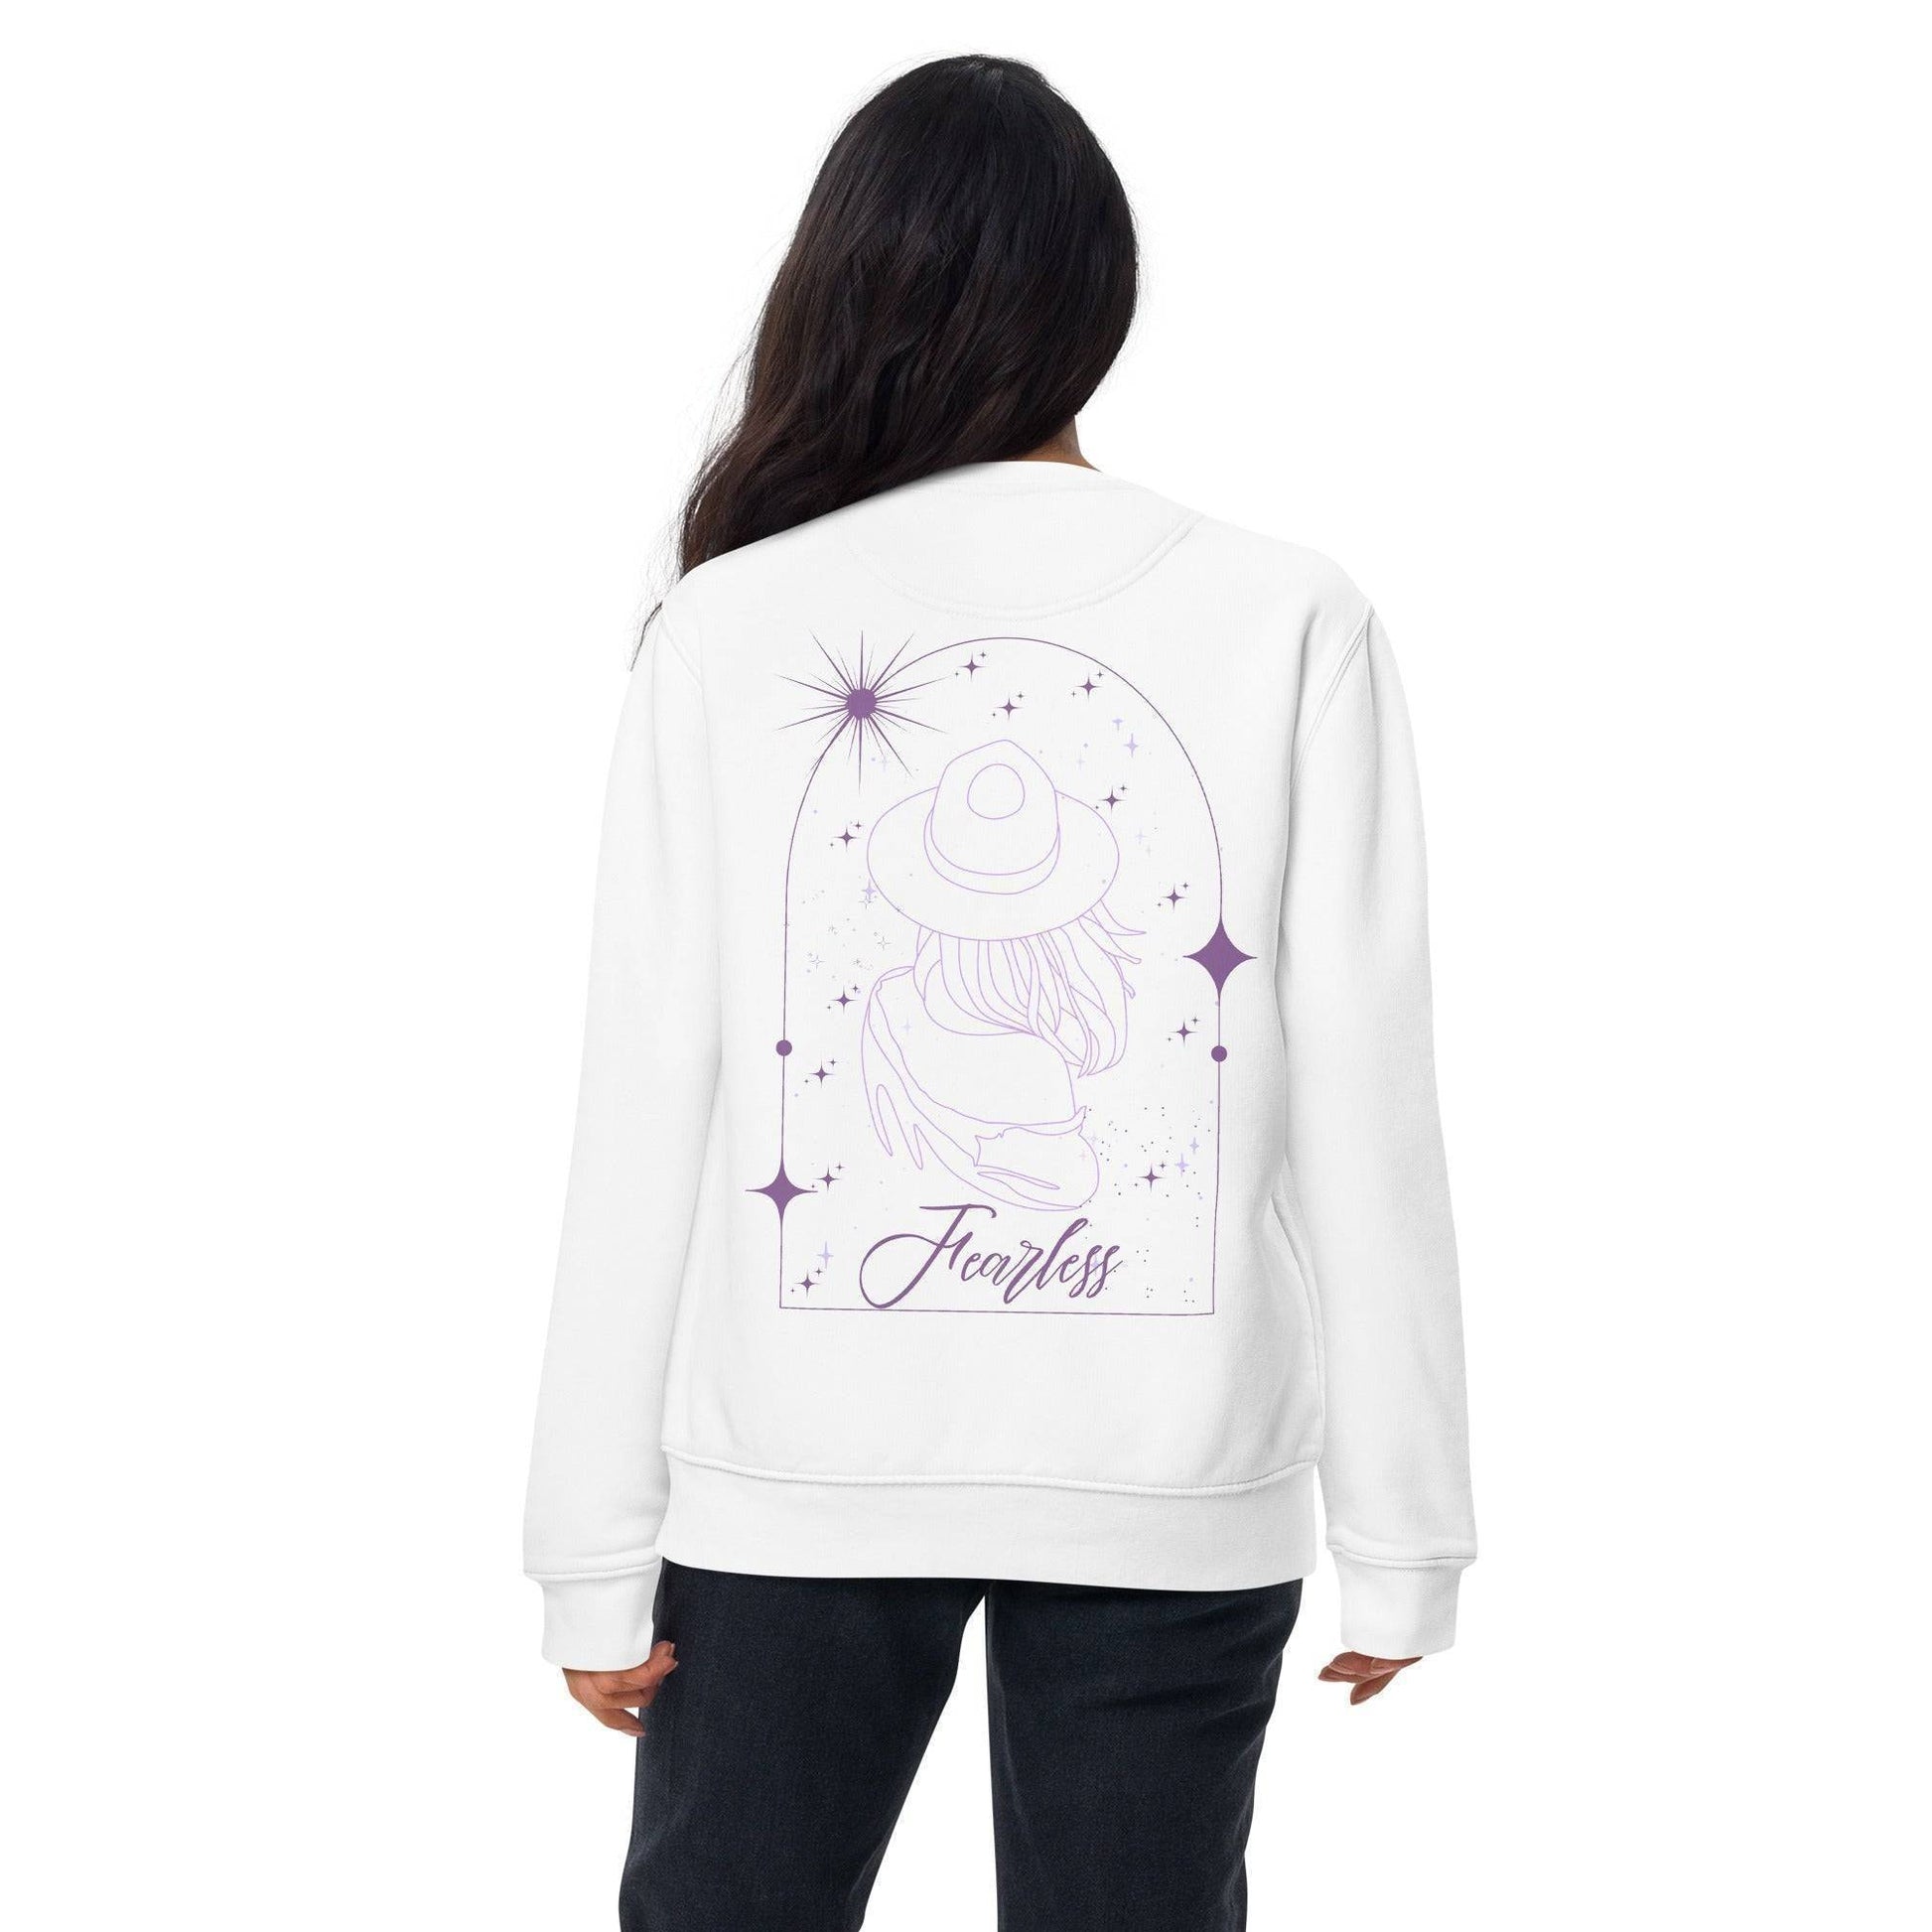 Taylor Swift Fearless Embroidered Sweatshirt